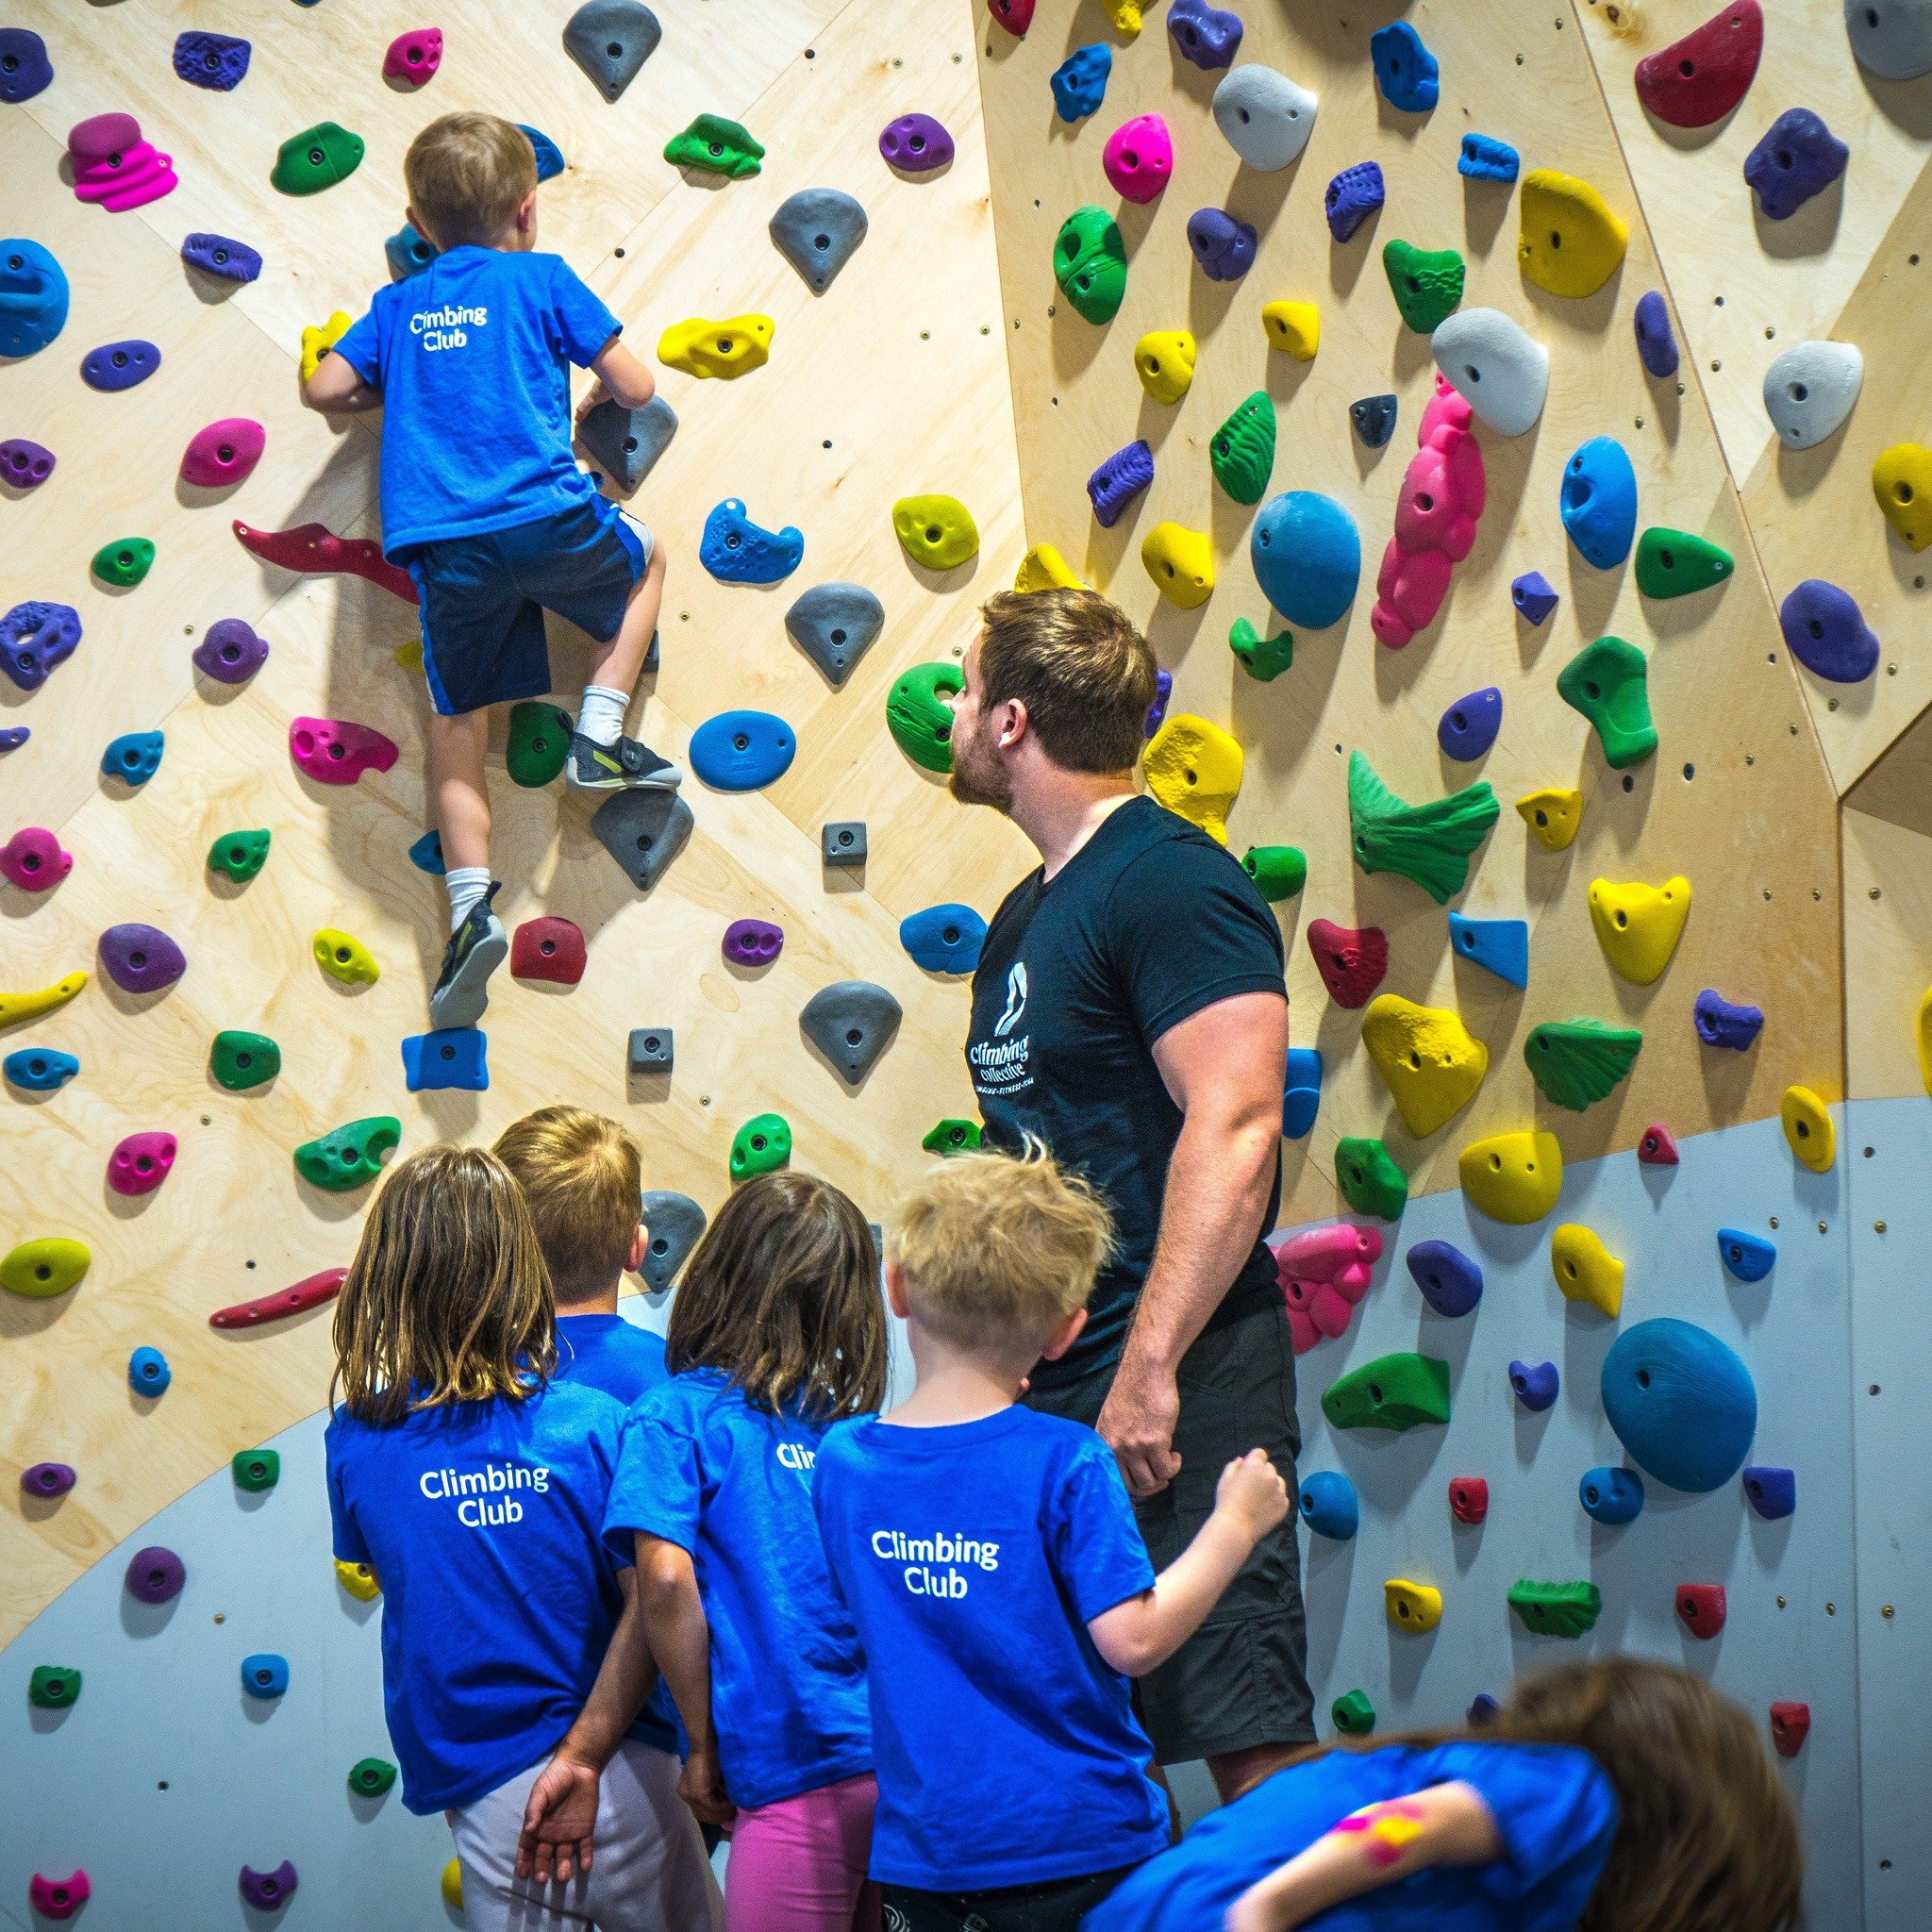 Sign up for summer camps today! For ages 4-13, sign up today and become apart of this amazing climbing community!